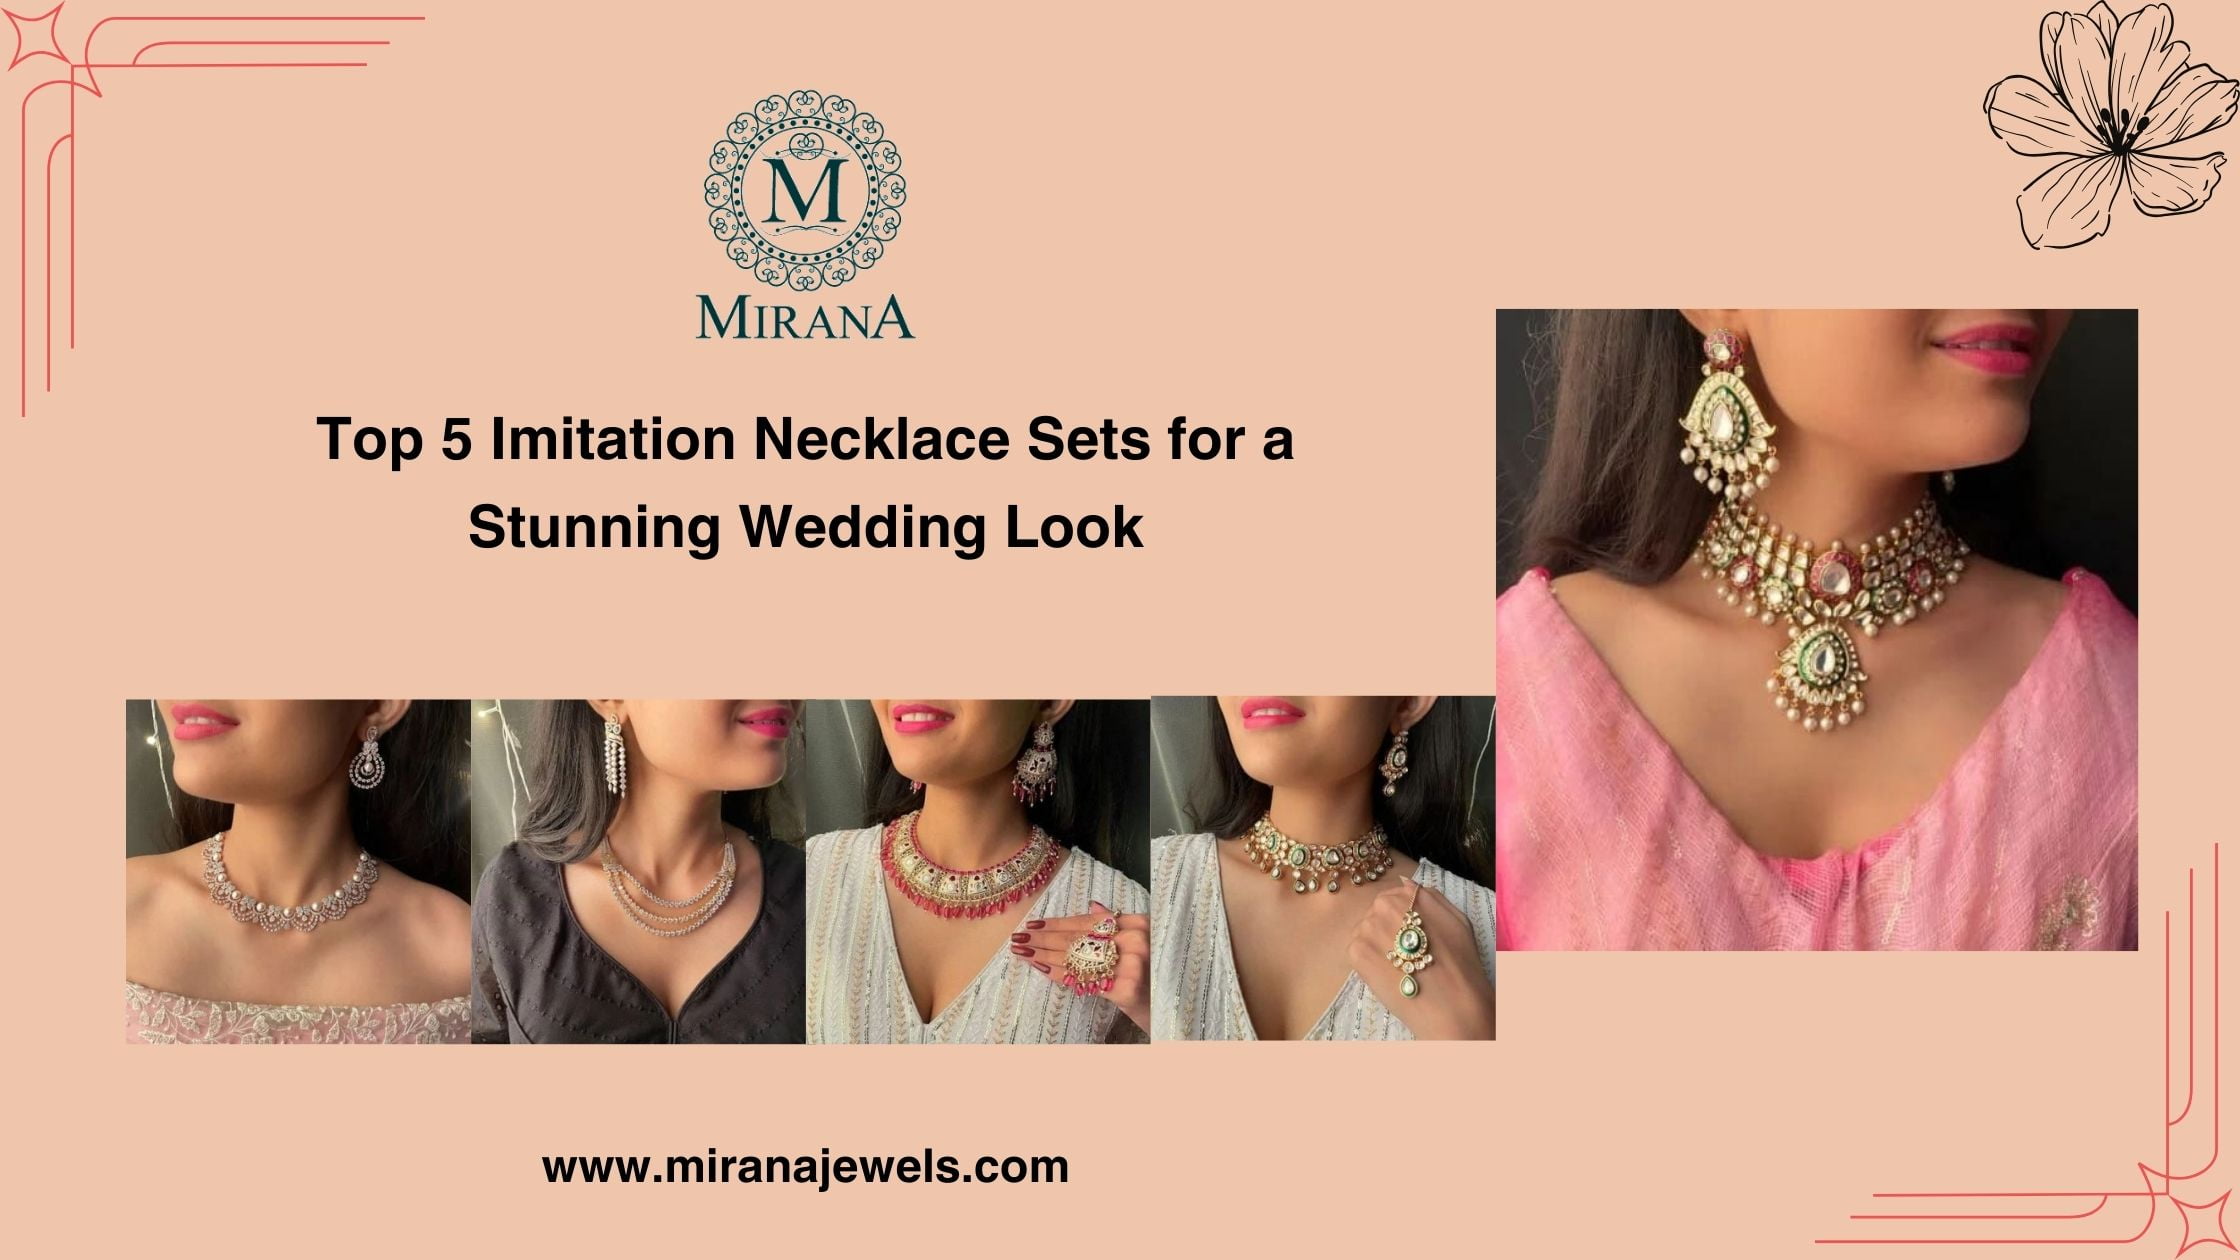 Top 5 Imitation Necklace Sets for a Stunning Wedding Look